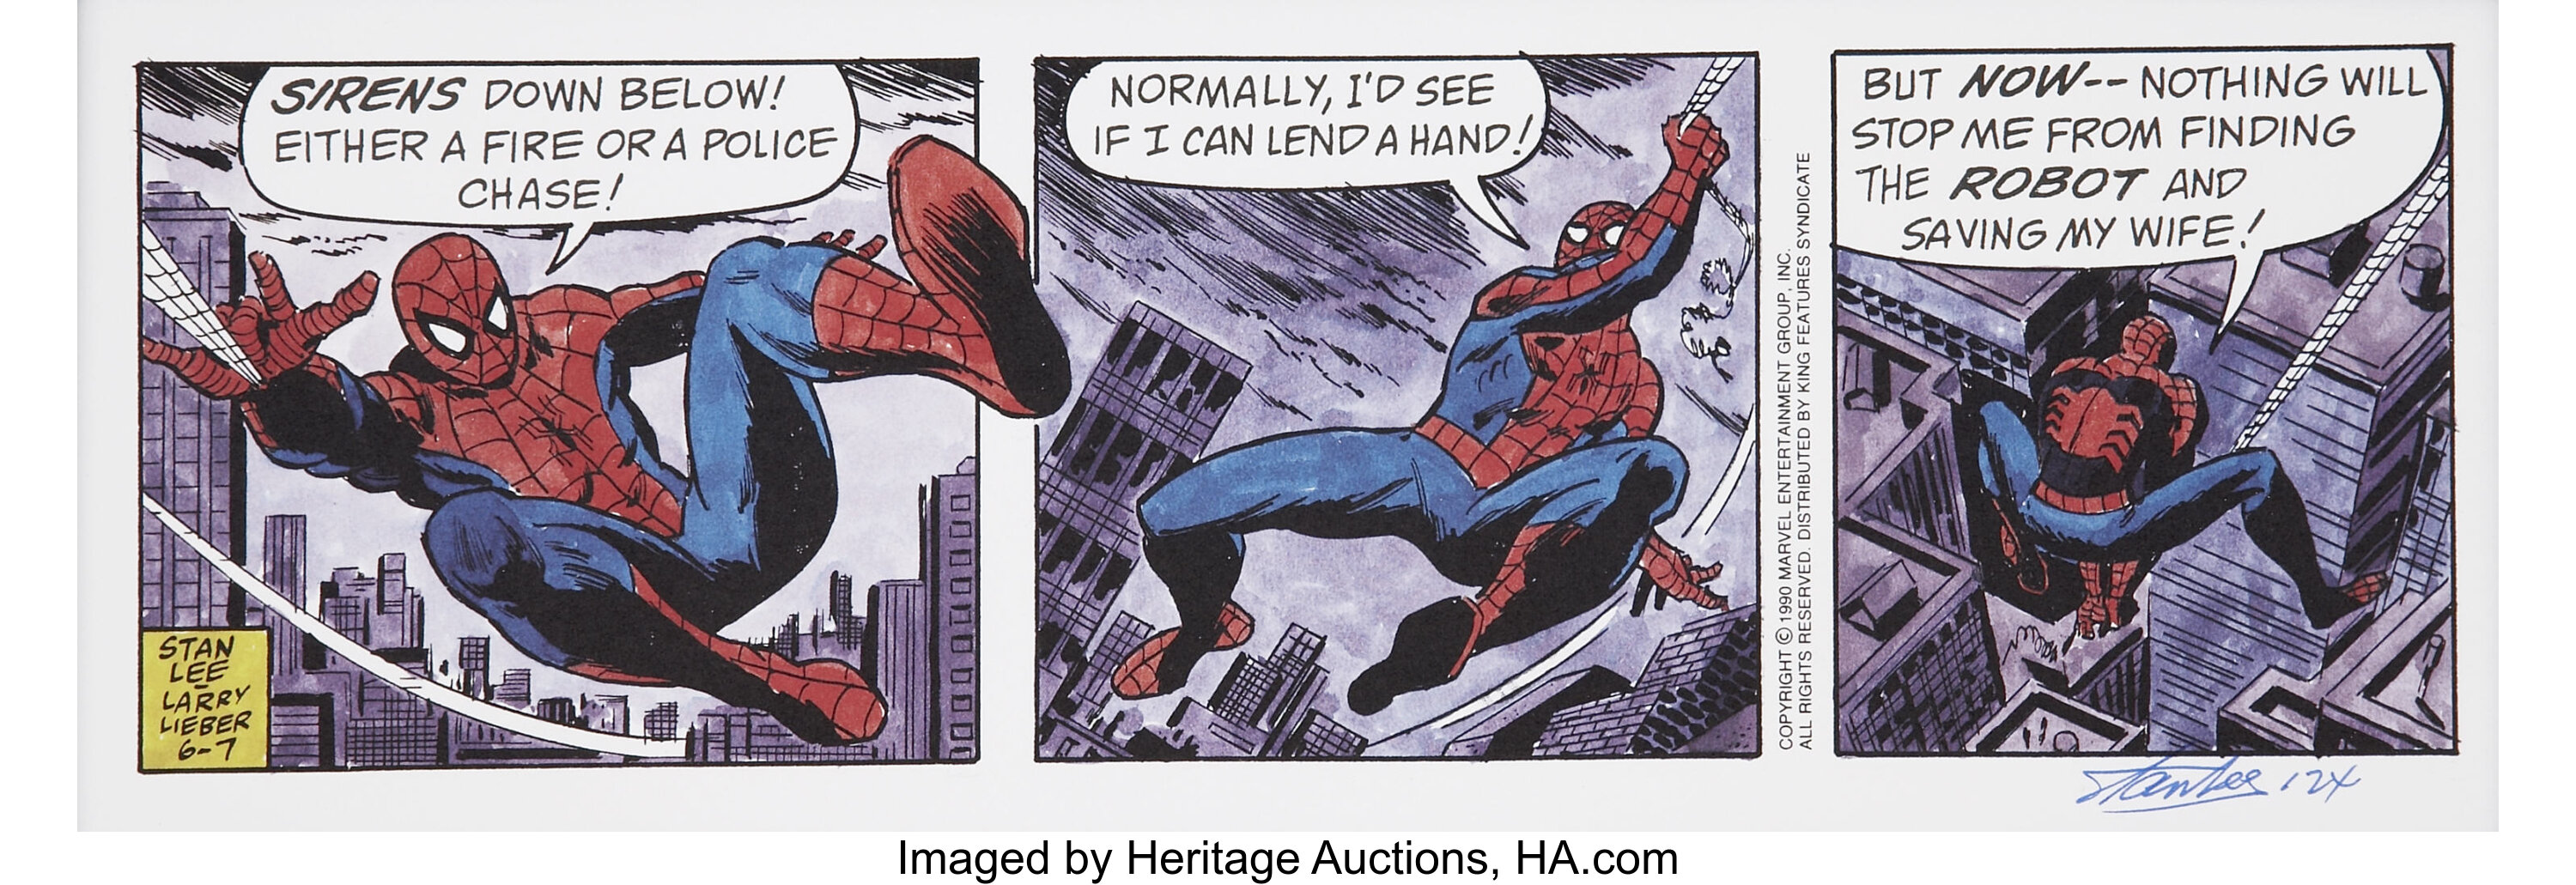 The Amazing Spider-Man Daily Comic Strip Print Signed by Stan Lee | Lot  #14605 | Heritage Auctions